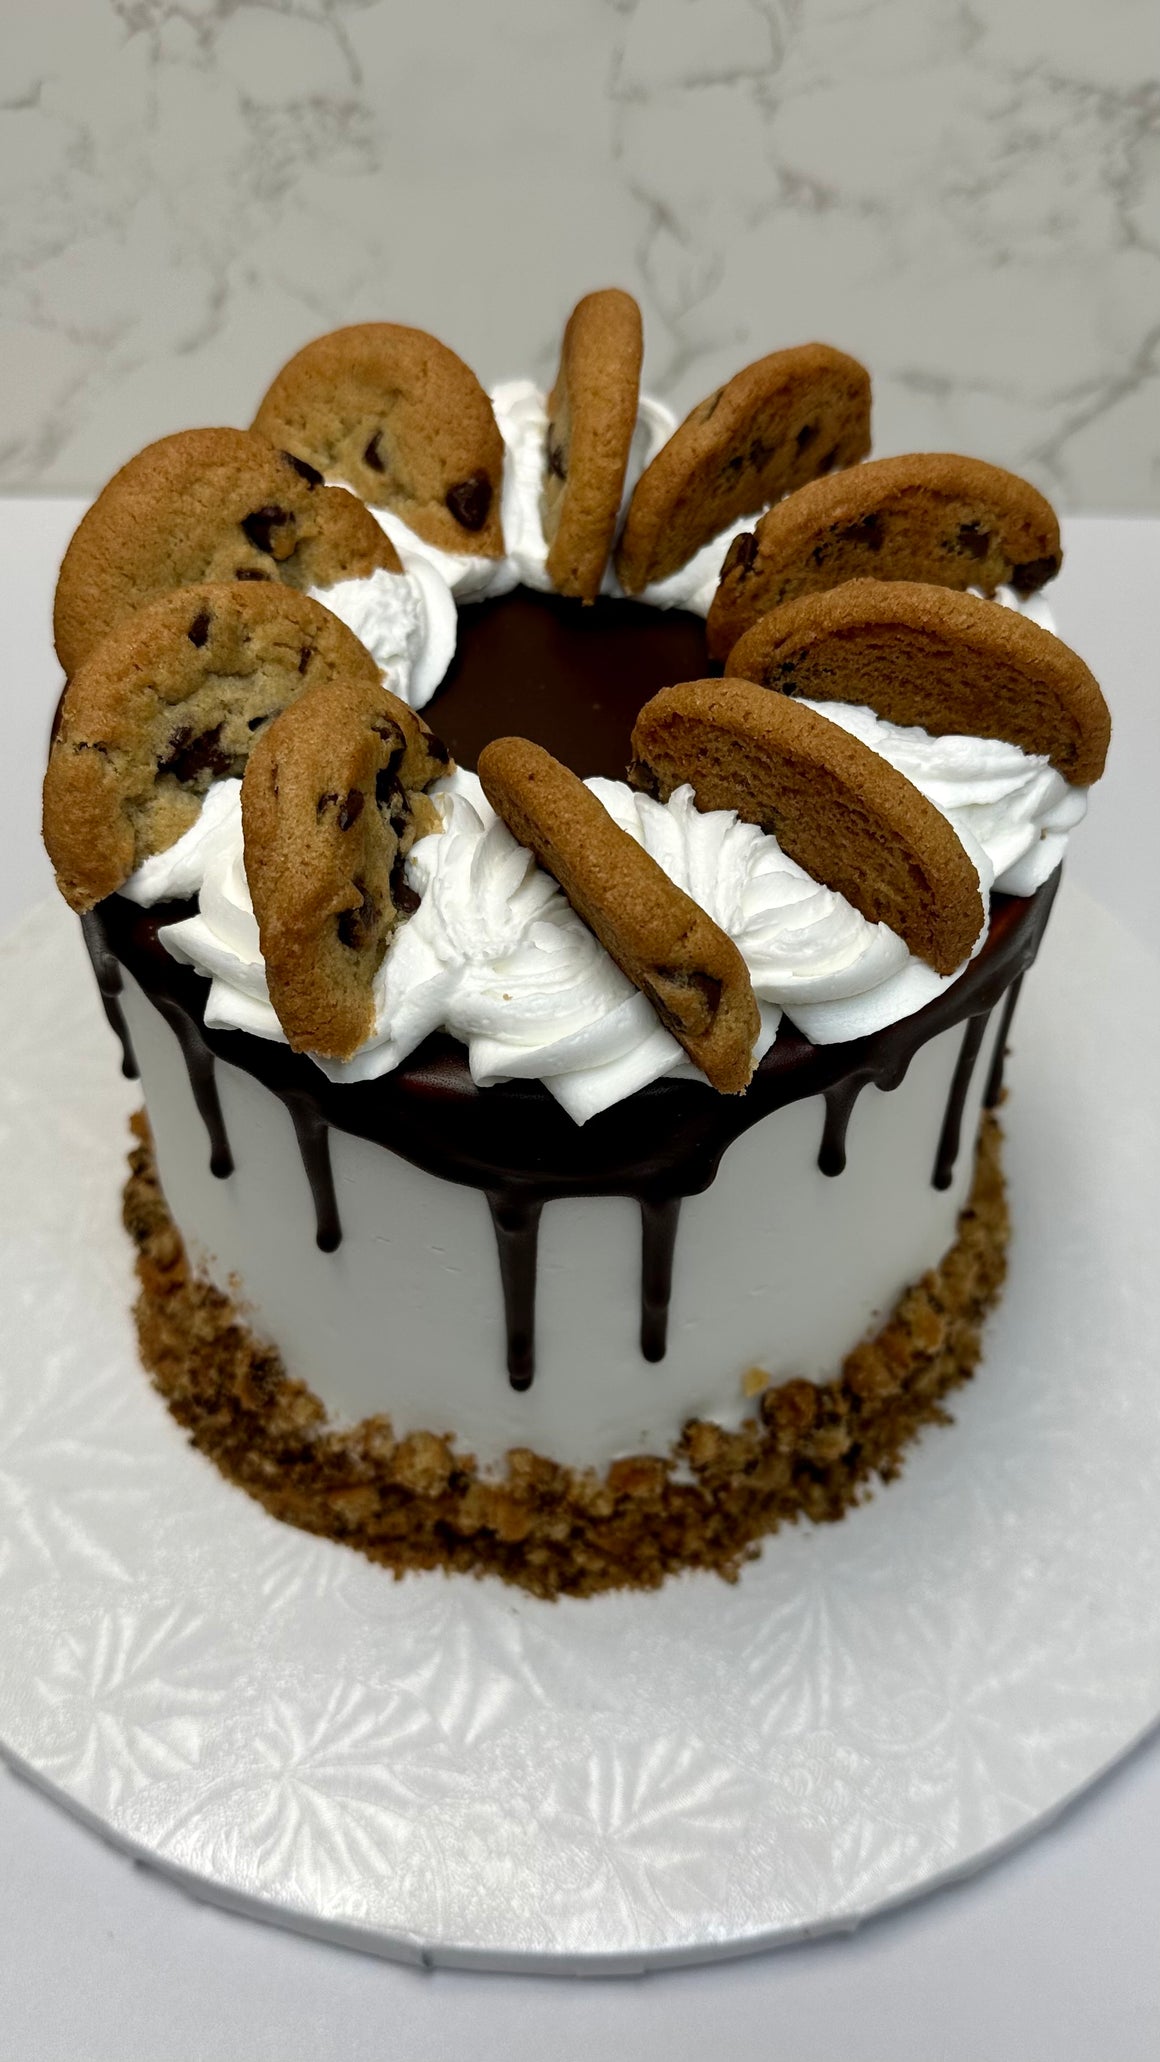 Cookie Dough Lover's Cake 6"